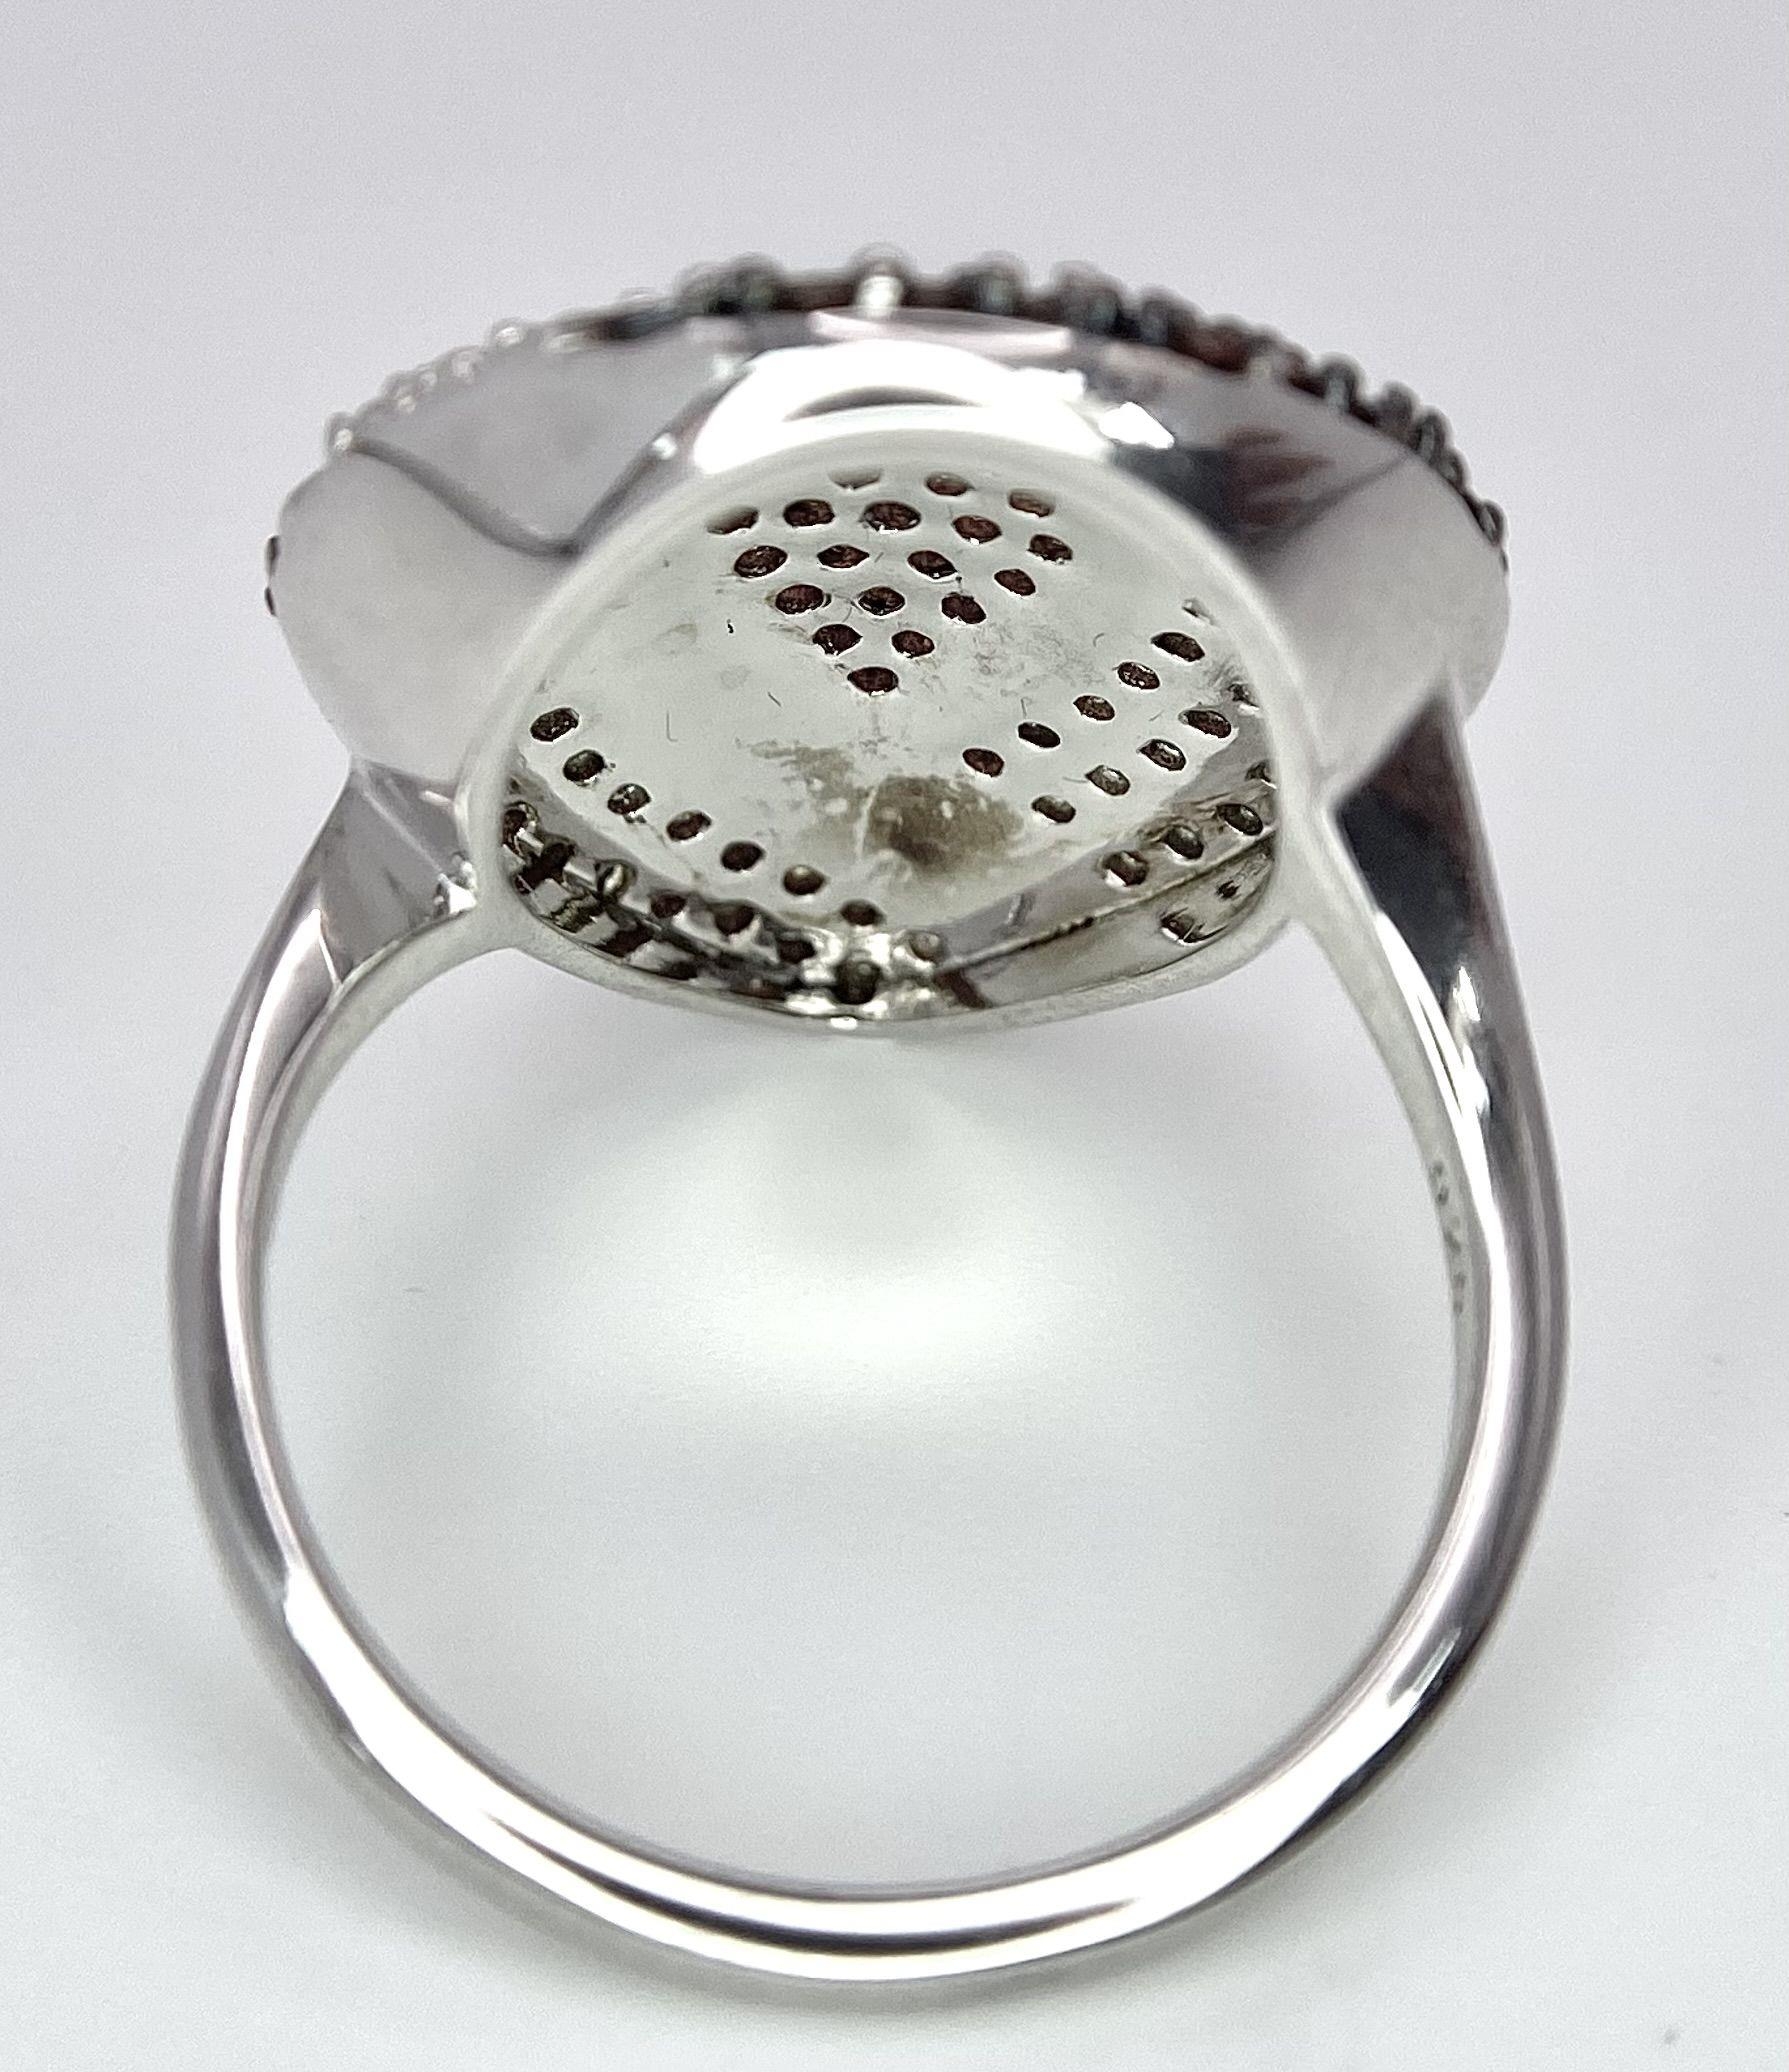 A Stunning, Unworn, Fully Certified Limited Edition (1 of 50), Sterling Silver and Anthill Garnet - Image 5 of 7